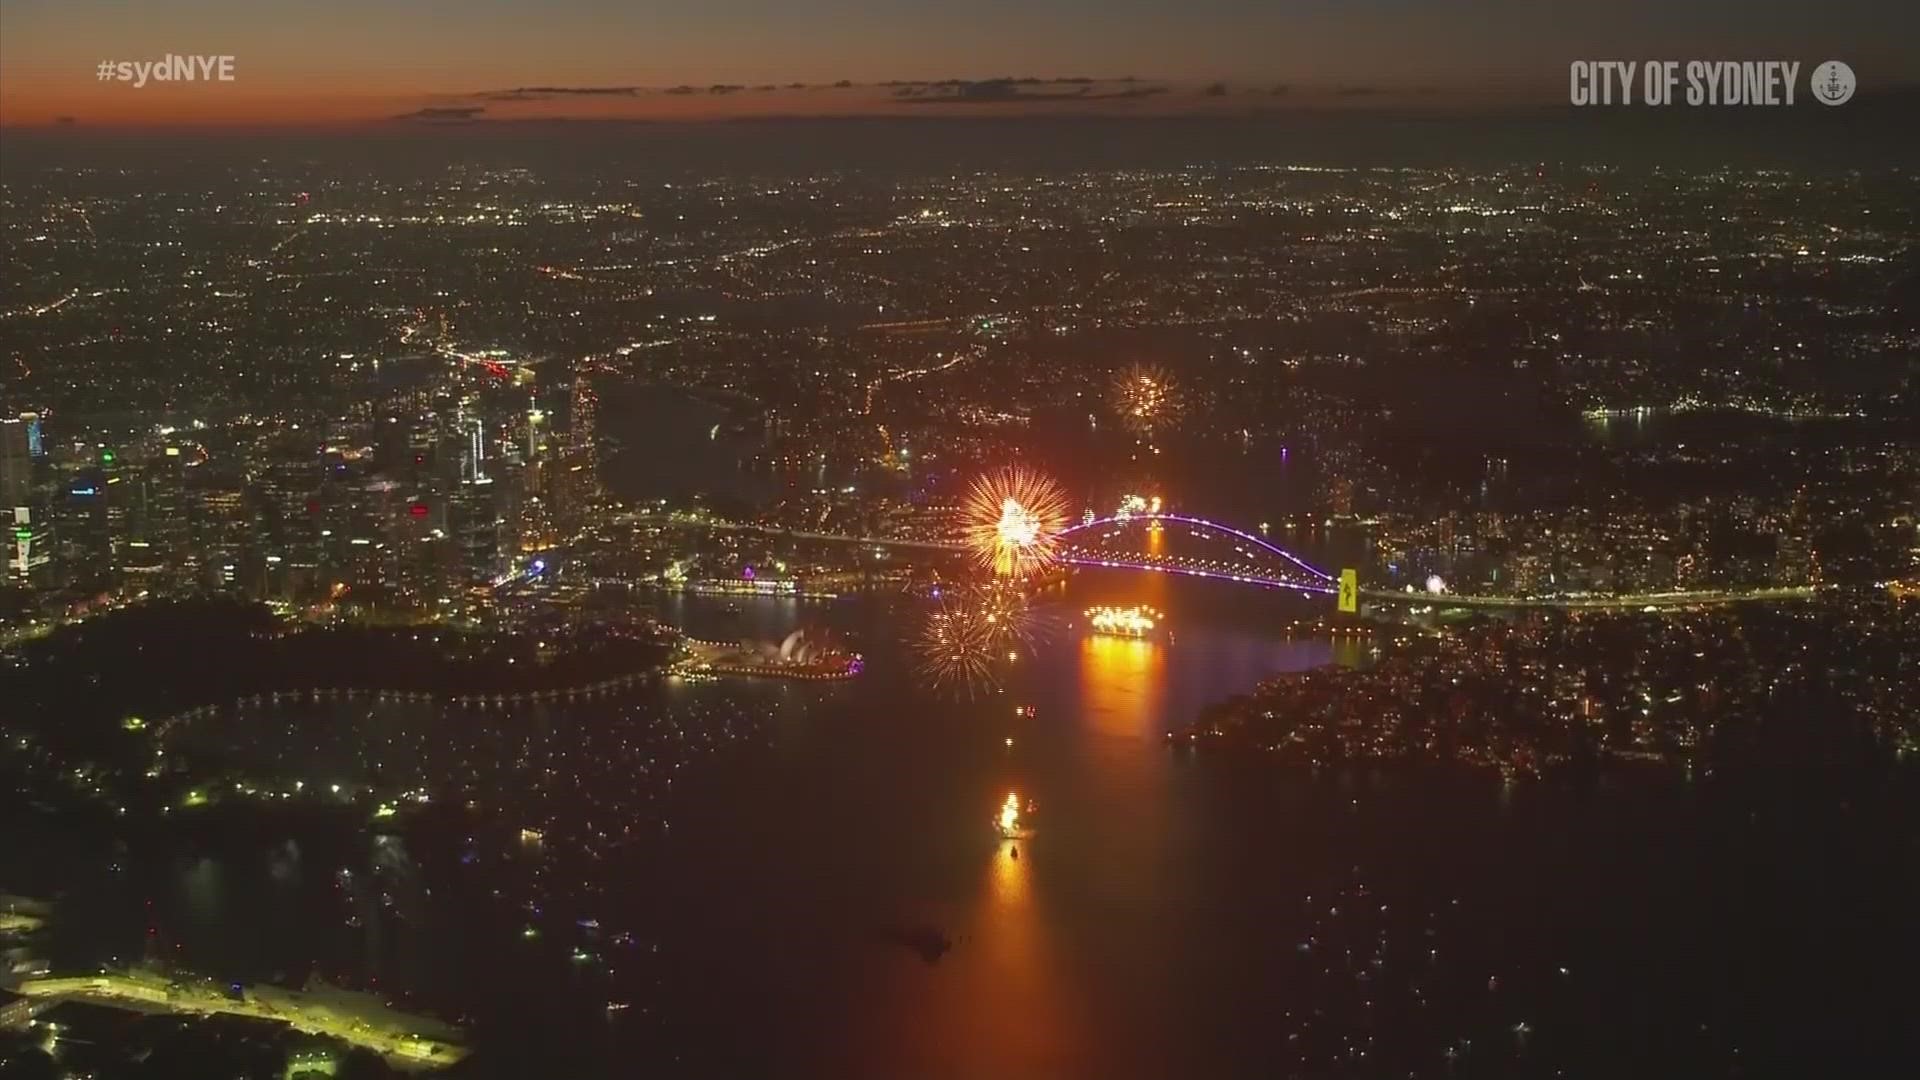 Fireworks were launched over Sydney Harbour at 9 p.m. local time, ahead of the New Year's fireworks display at midnight, so children could watch.